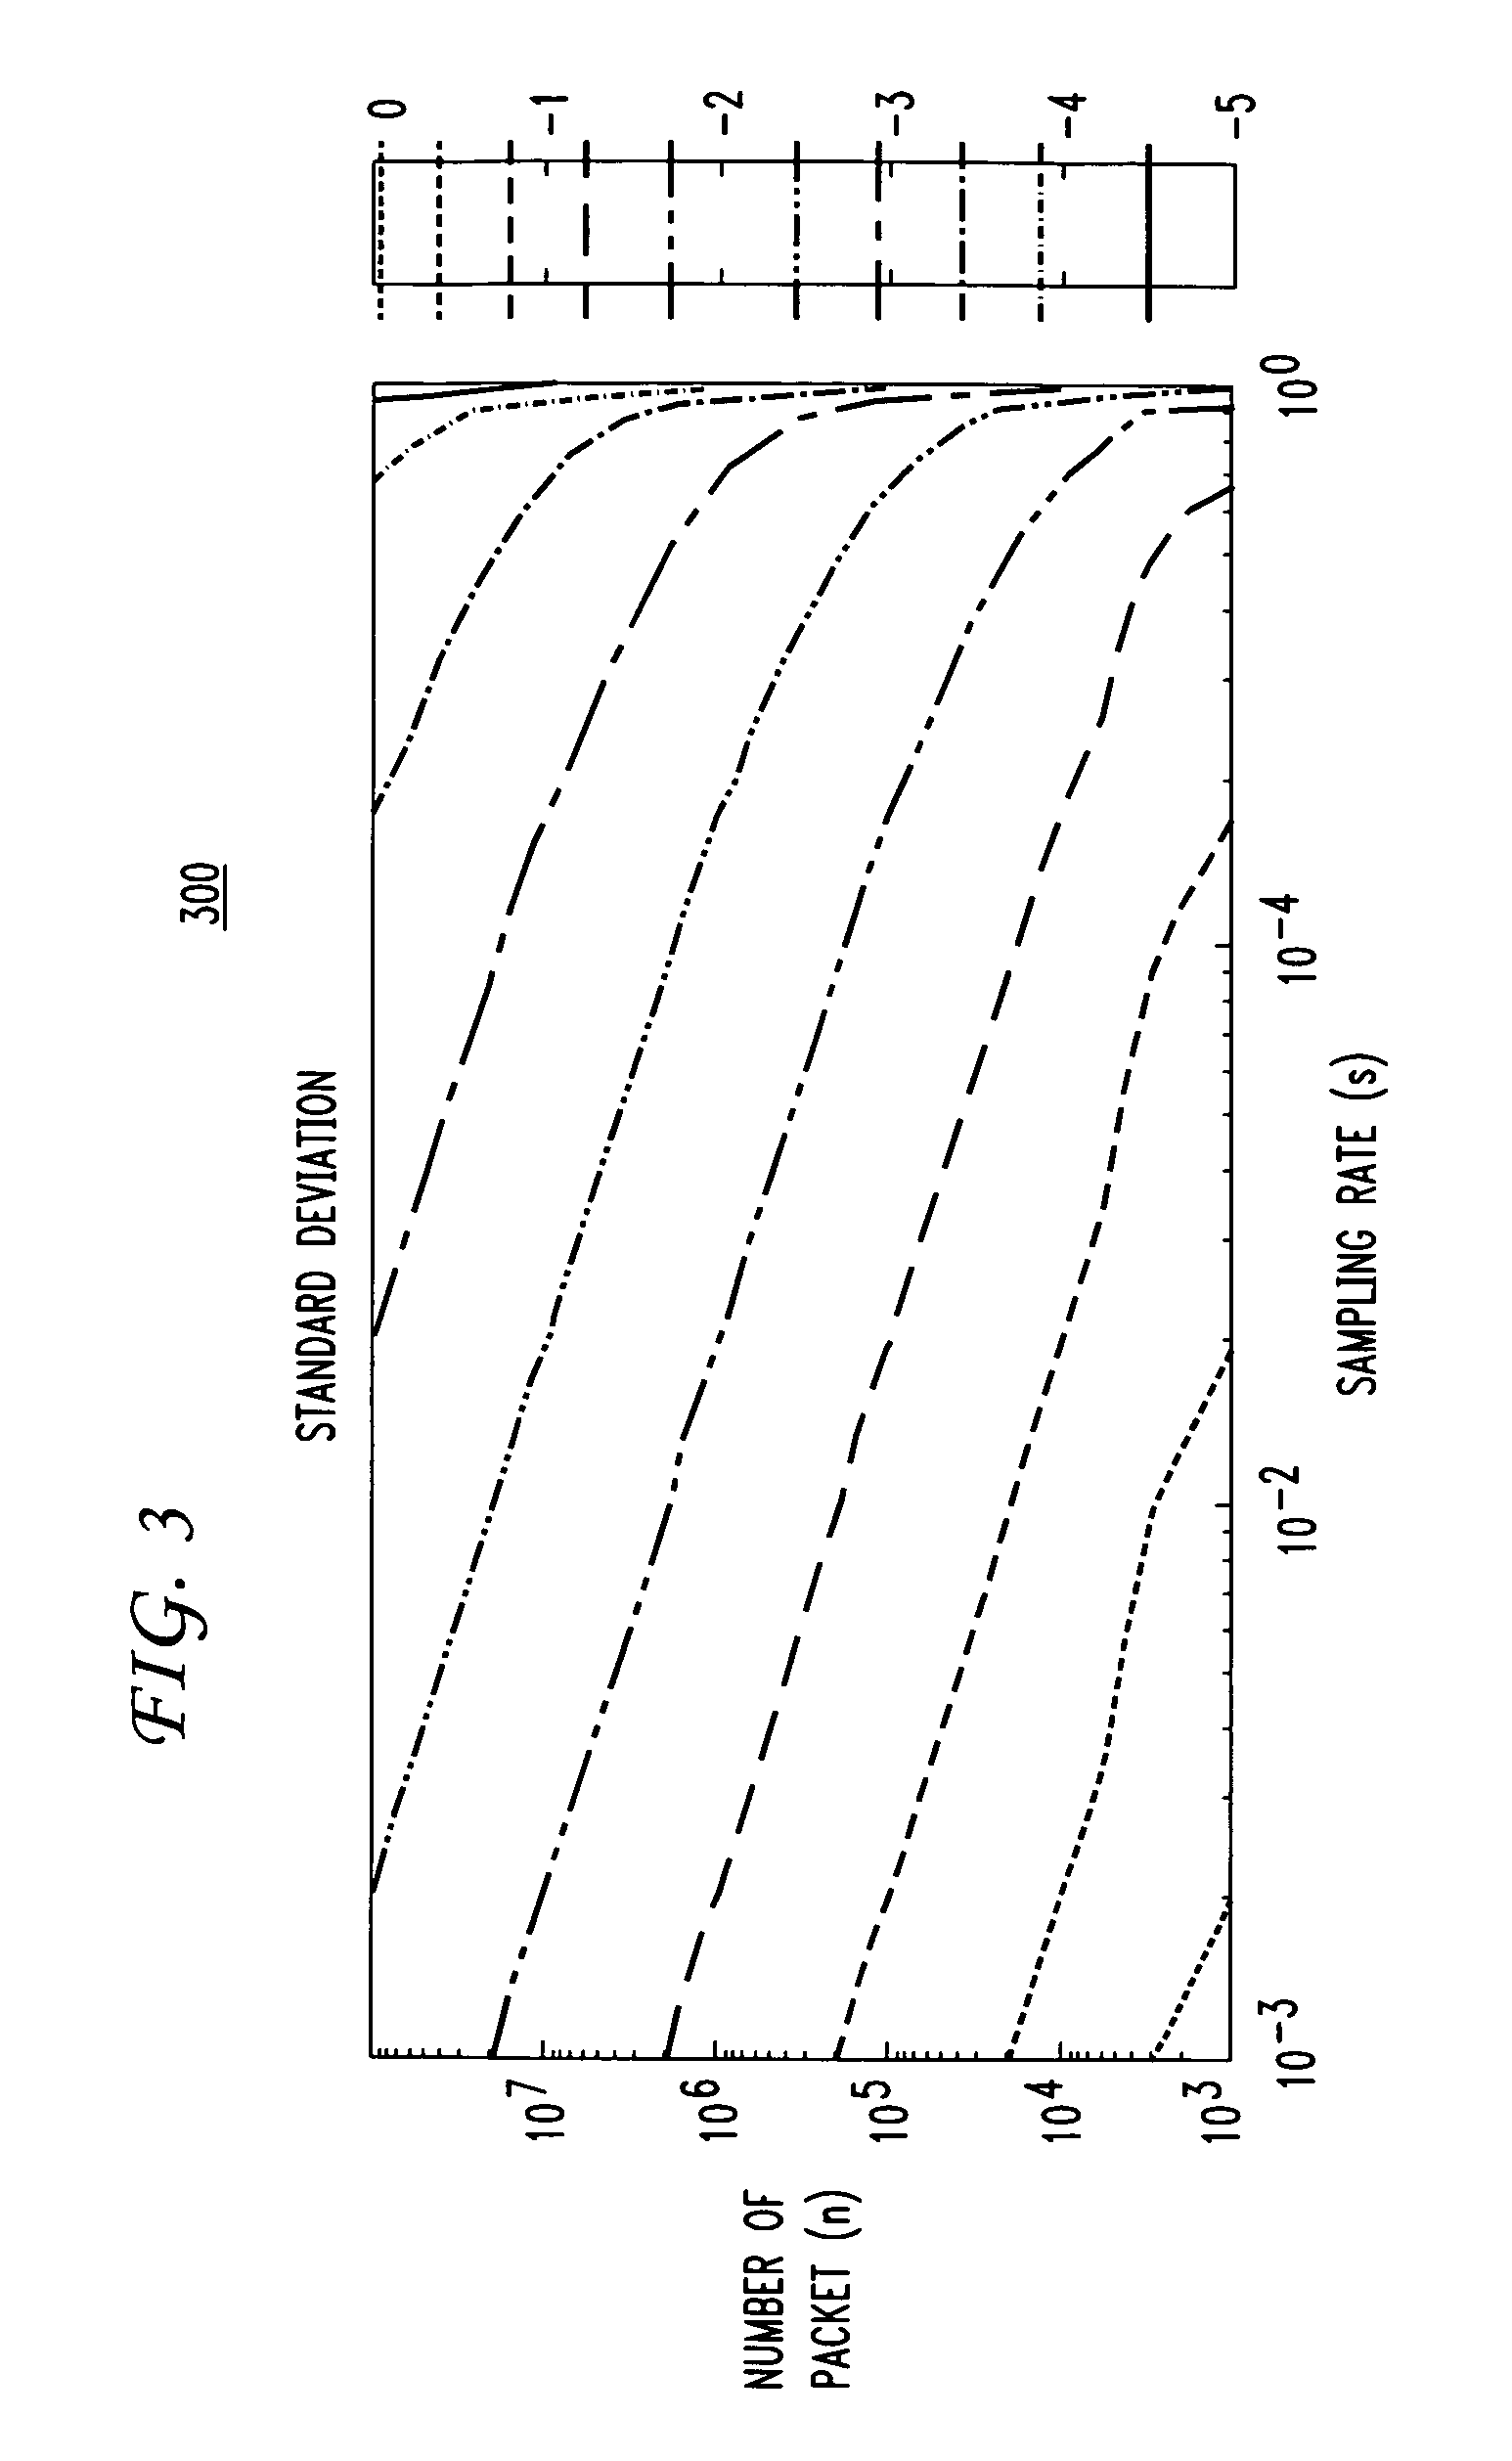 Method and apparatus for one-way passive loss measurements using sampled flow statistics